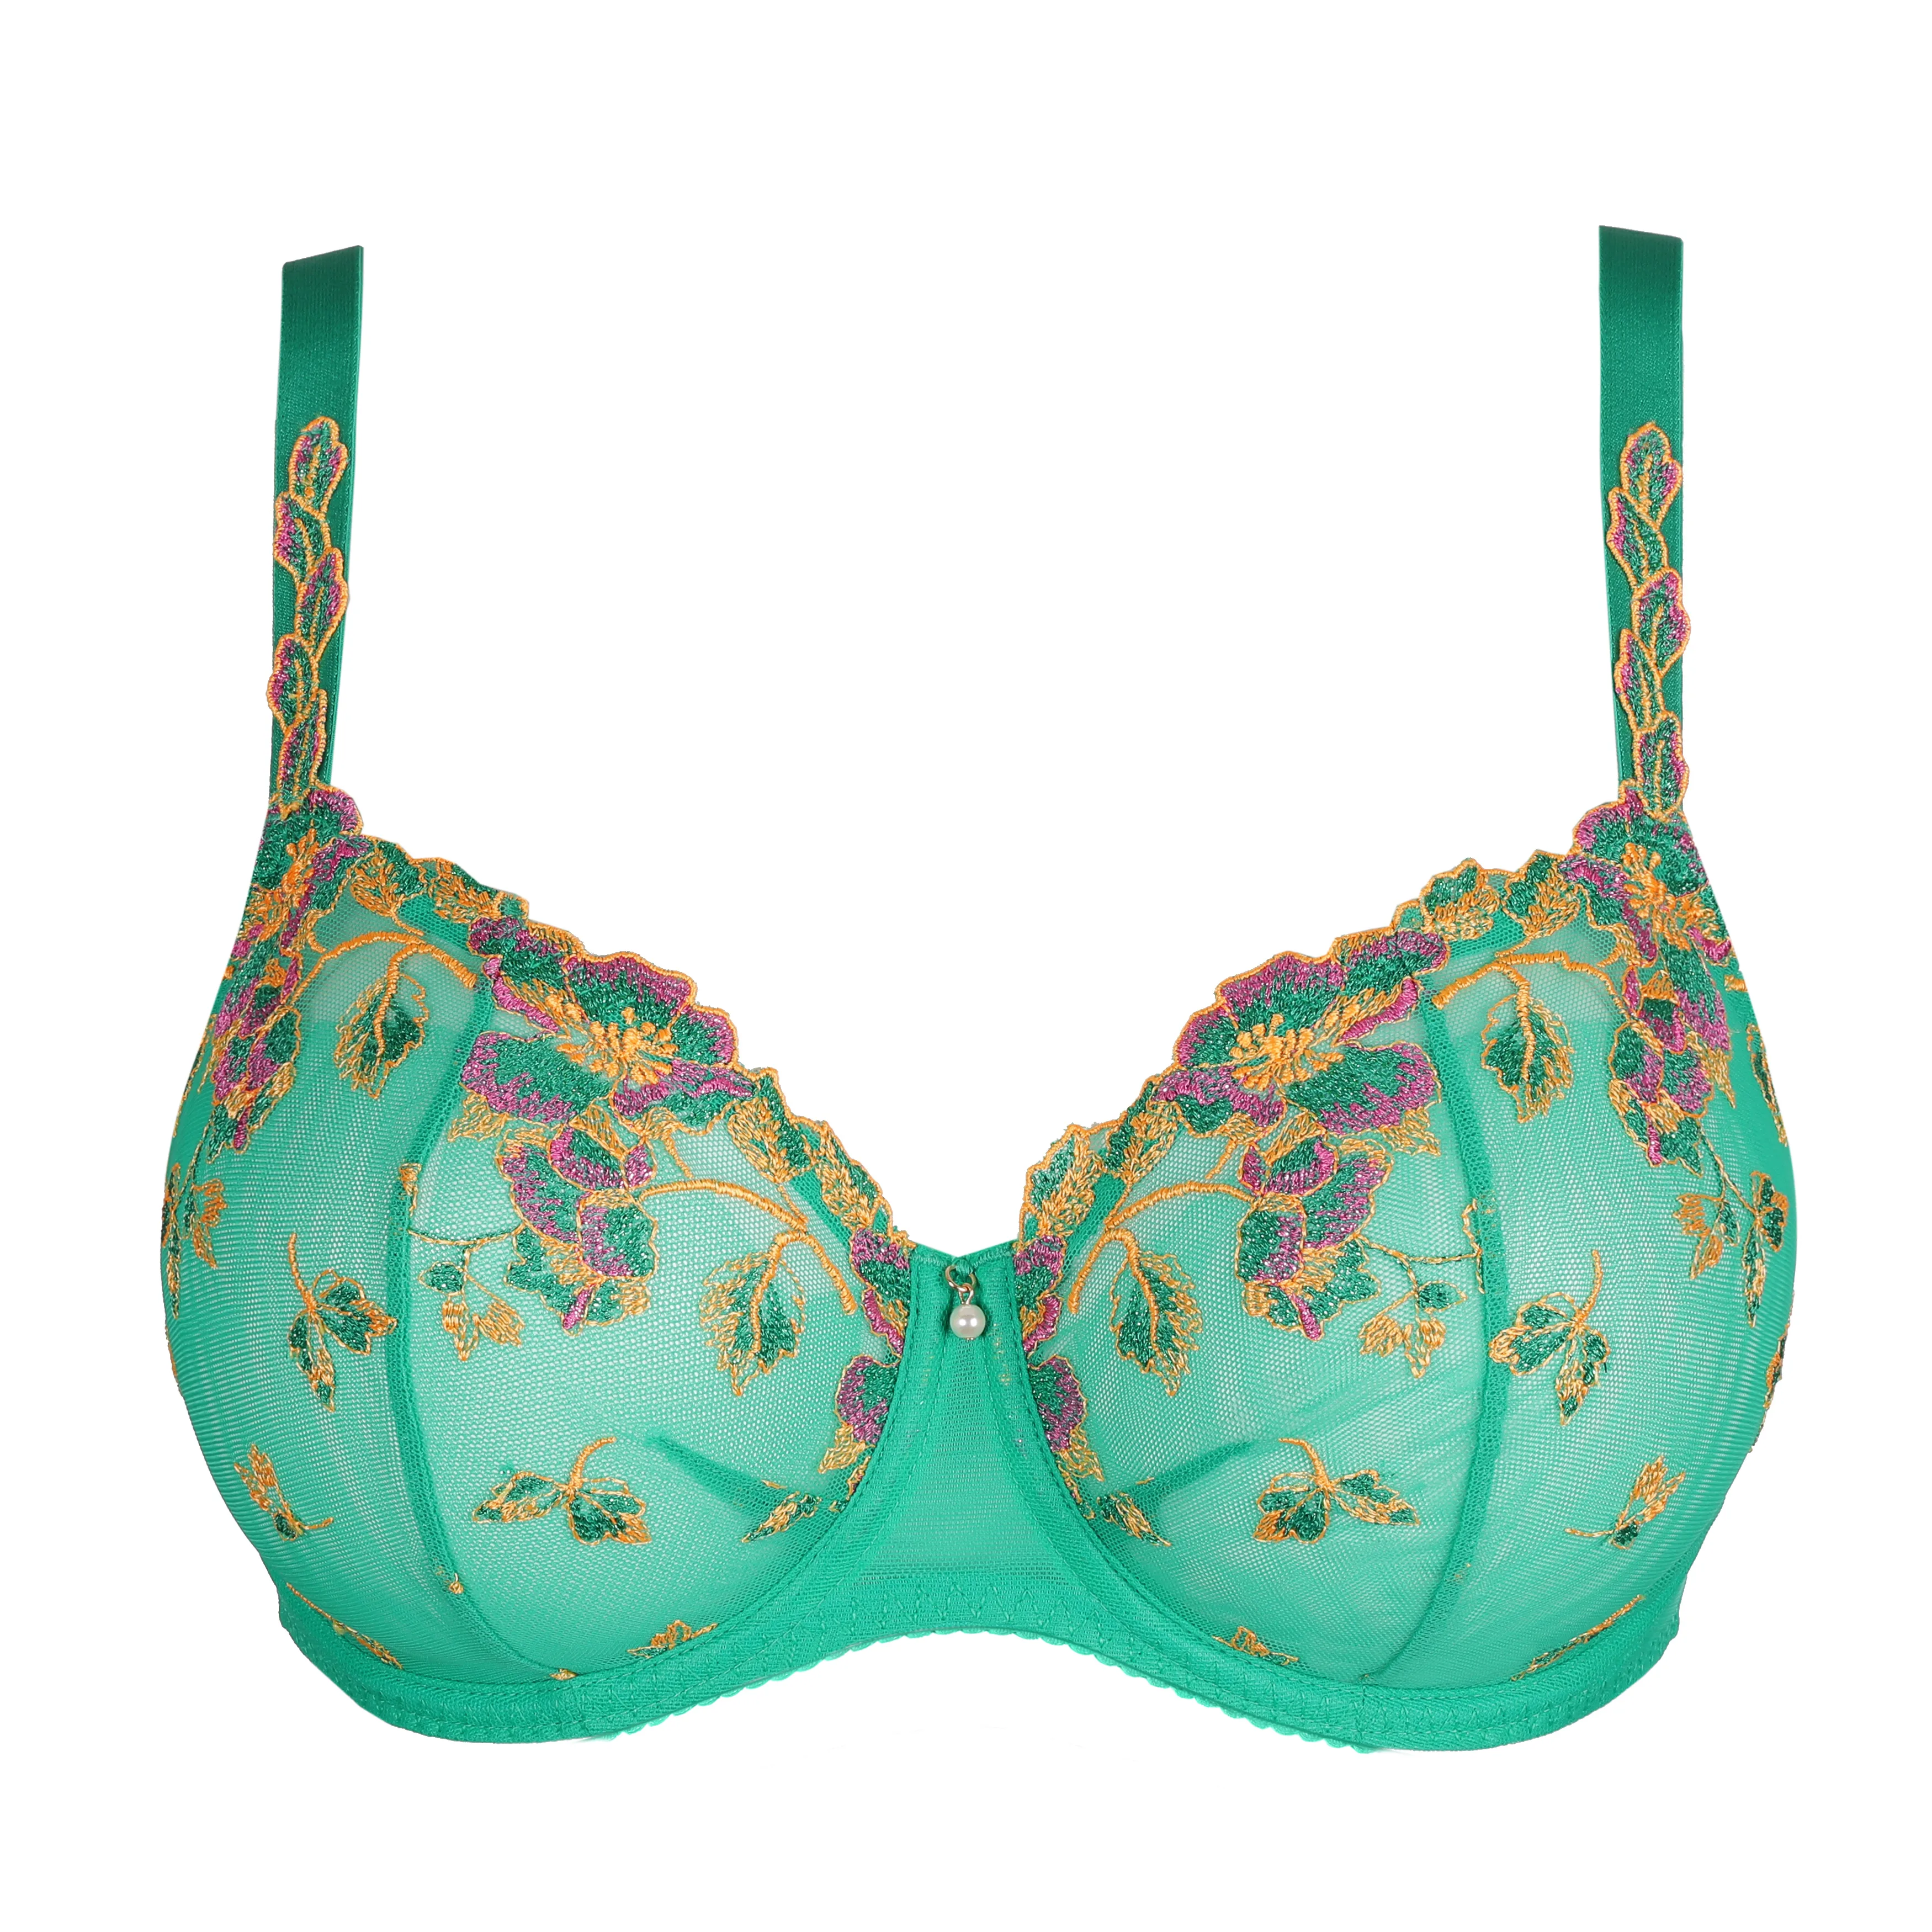 Teal lace full bust bra